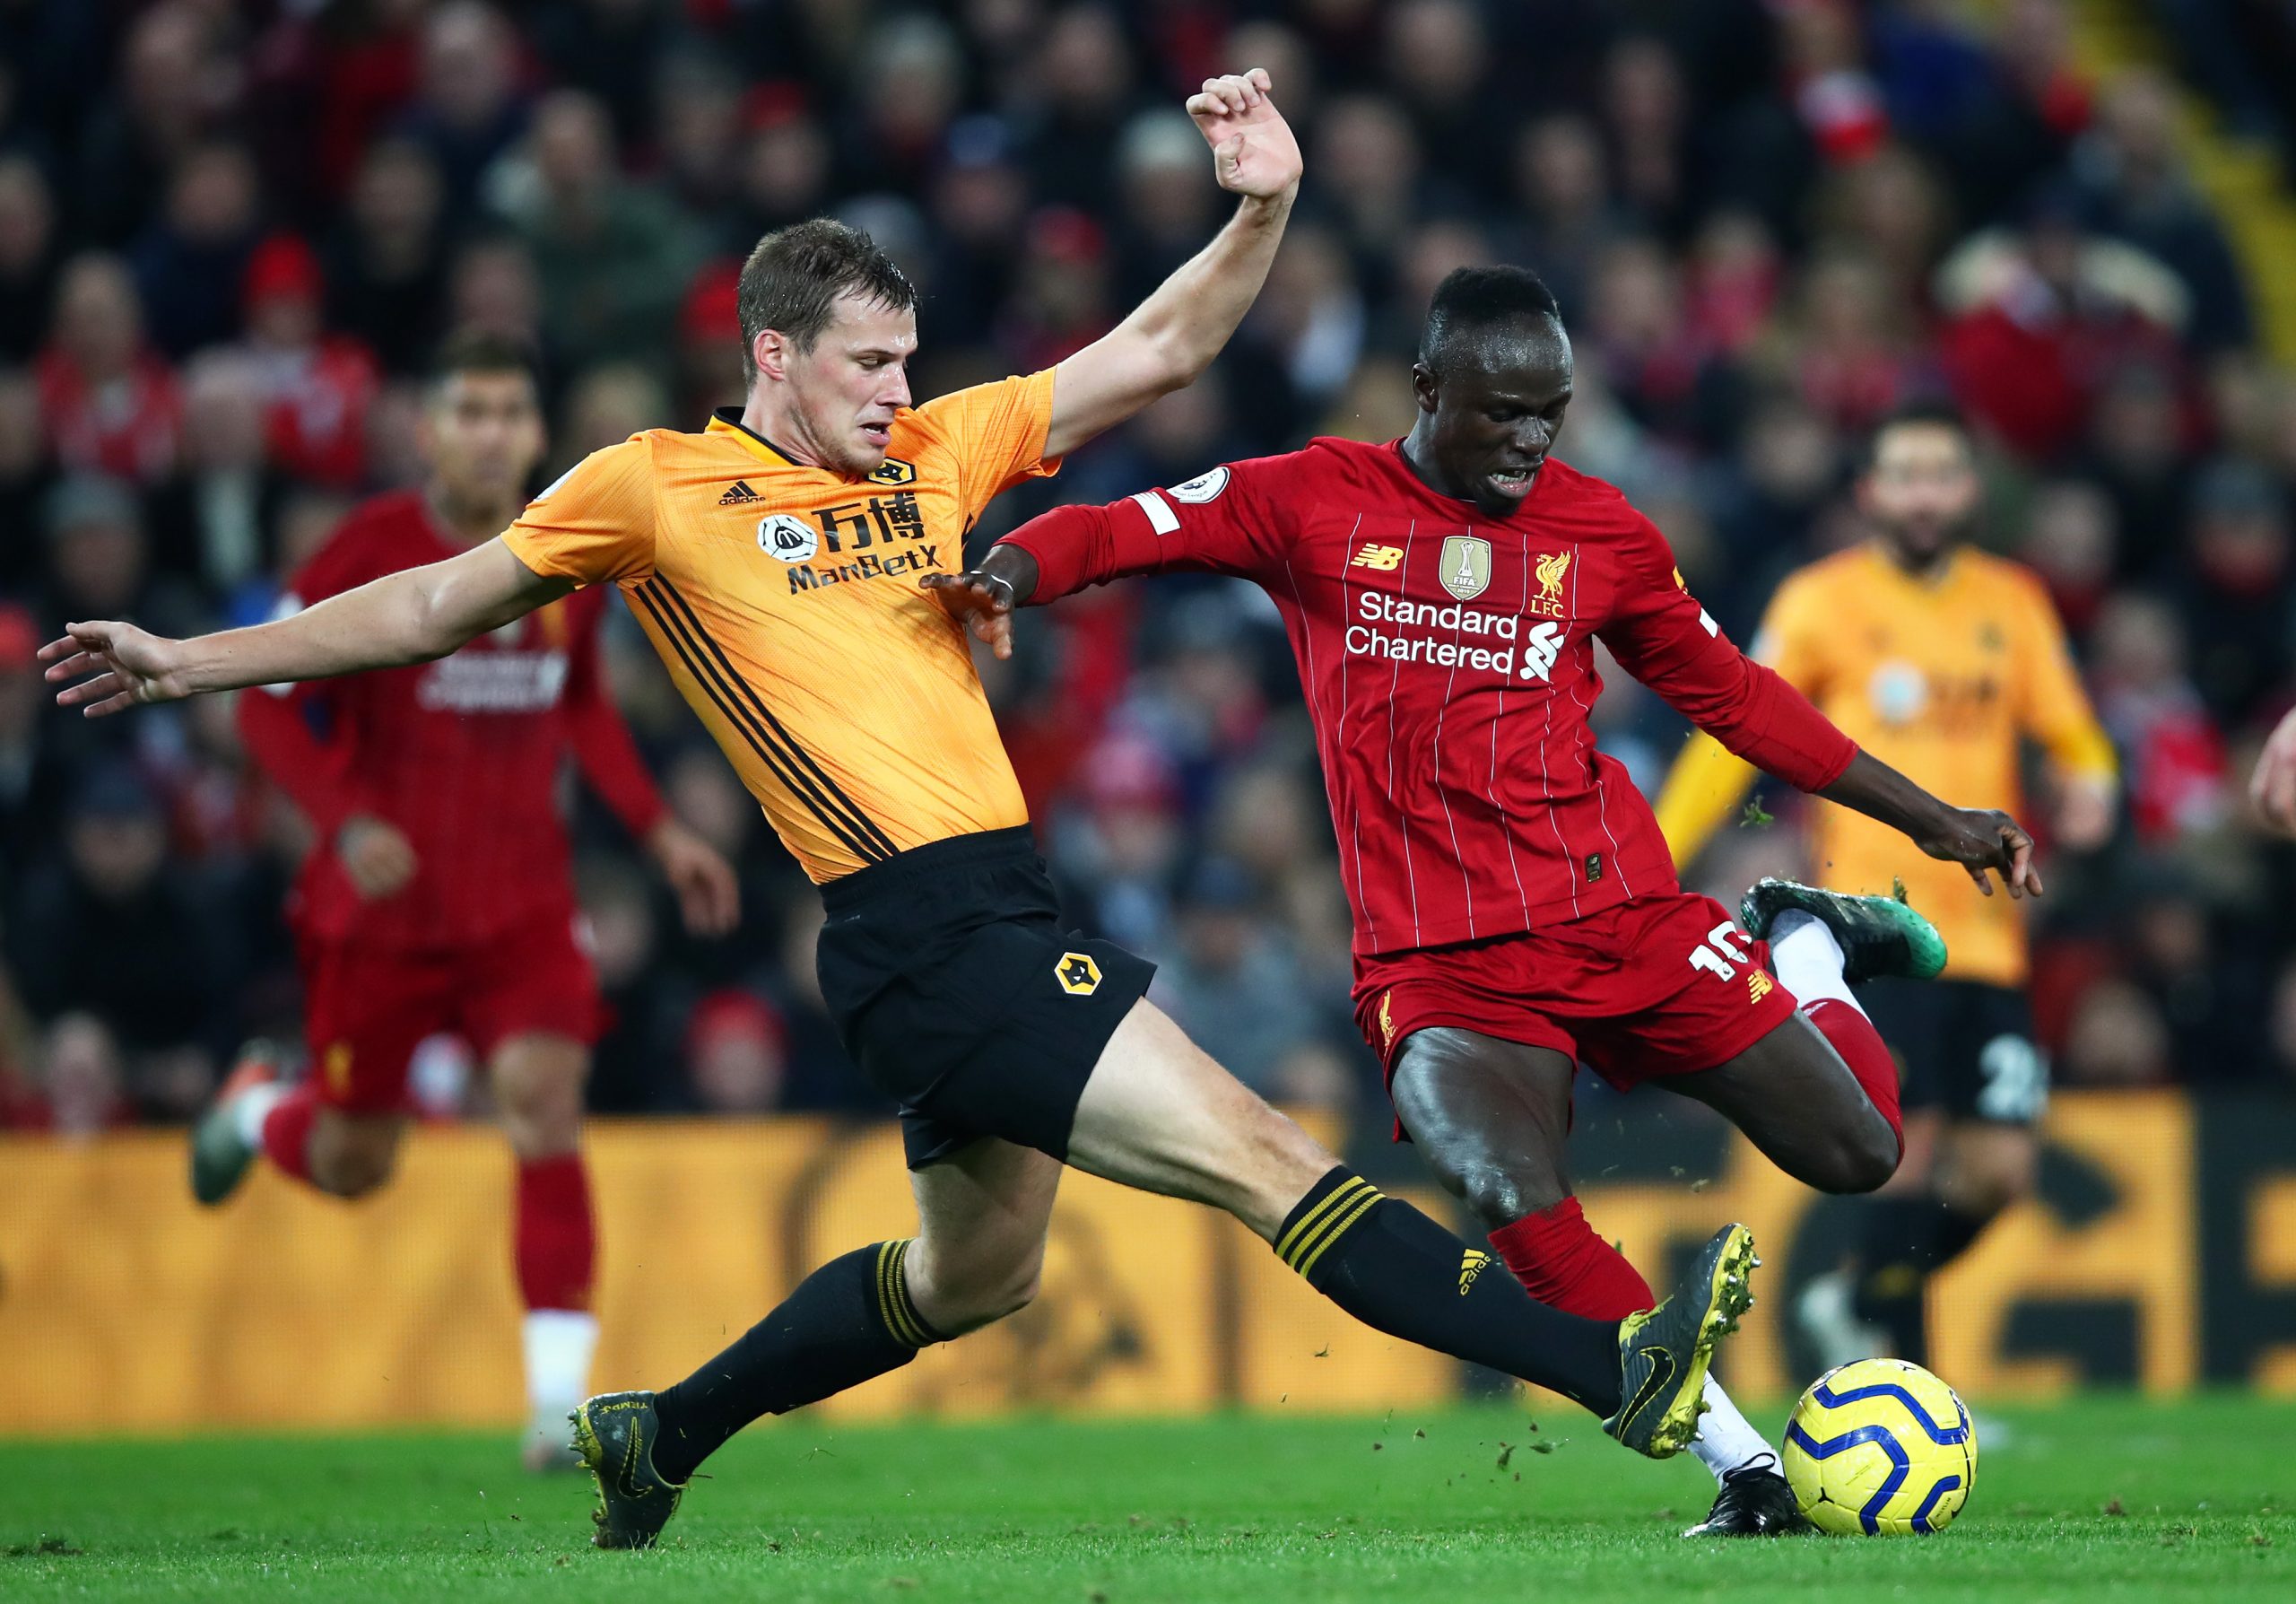 Sadio Mane of Liverpool closed down by Ryan Bennett of Wolverhampton Wanderers during the Premier League match between Liverpool FC and Wolverhampton Wanderers at Anfield on December 29, 2019 in Liverpool, United Kingdom. (Photo by Clive Brunskill/Getty Images)